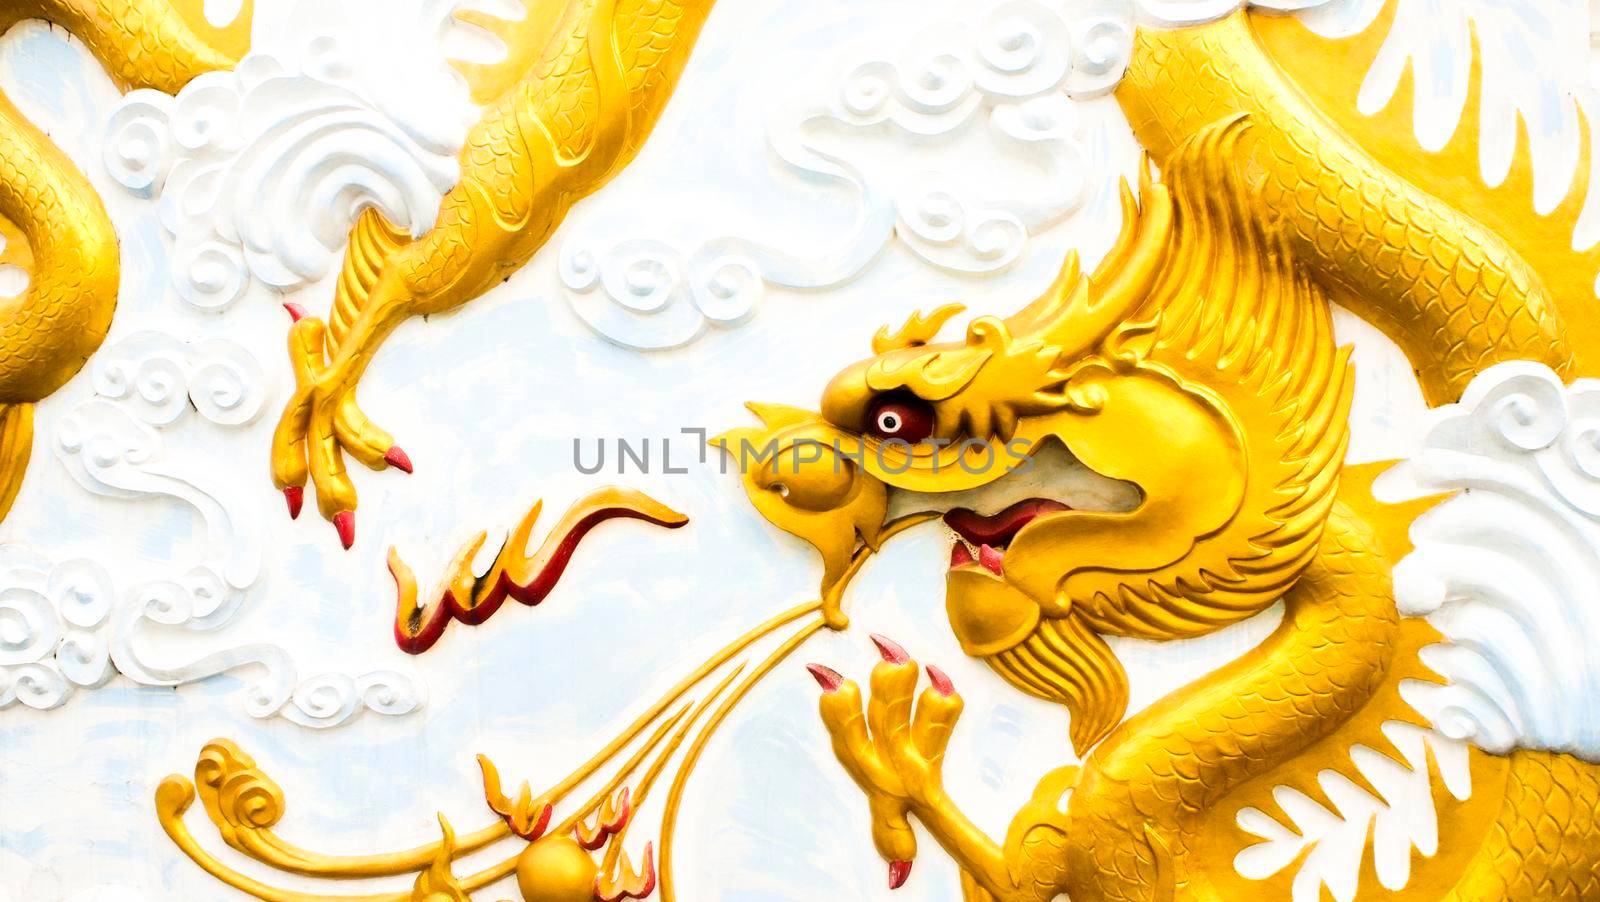 Abstract cultural art of Chinese Golden Dragon sculpture montage on wall ceiling of Asia temper architecture.